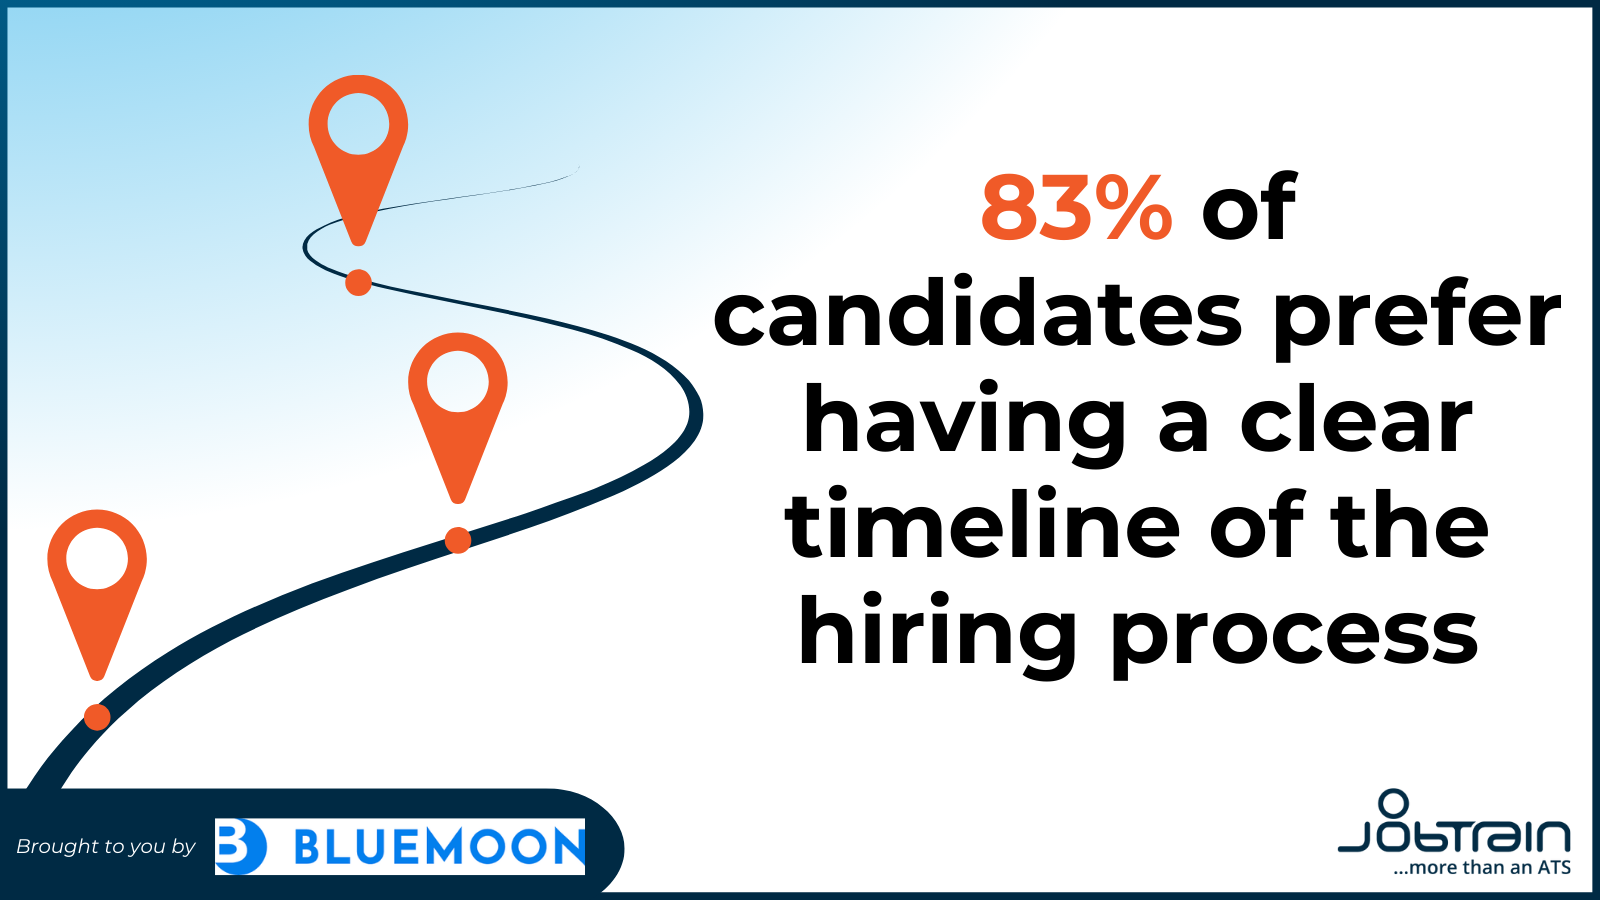 83% of candidates prefer having a clear timeline of the hiring process